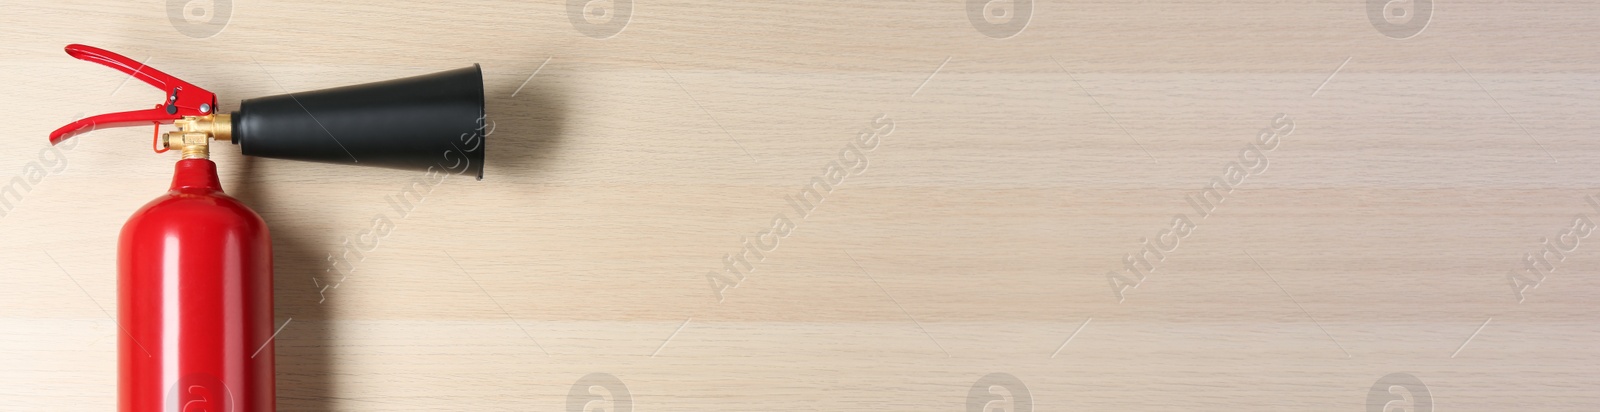 Image of Fire extinguisher on wooden background, top view with space for text. Banner design